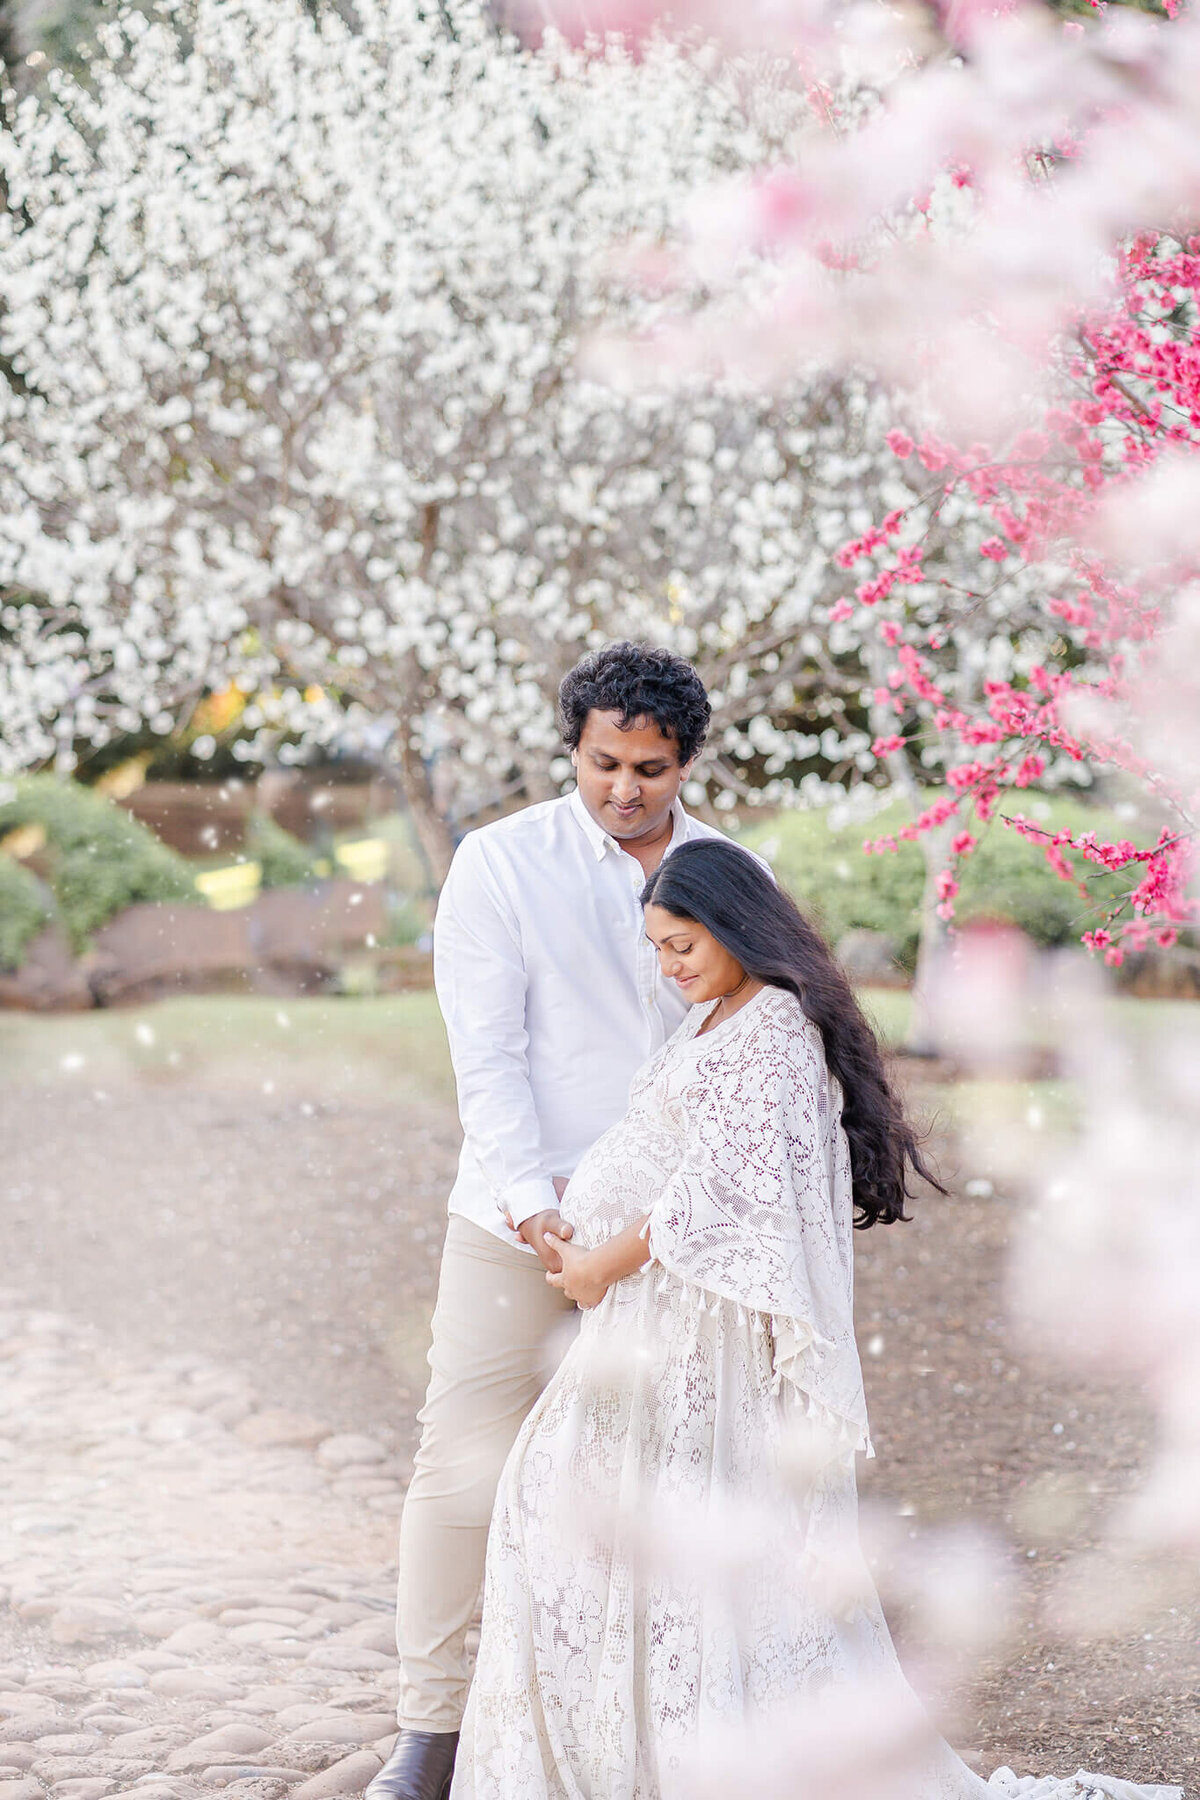 Capture the elegance of maternity blissfully portrayed at Brisbane's Japanese garden under cherry blossoms.